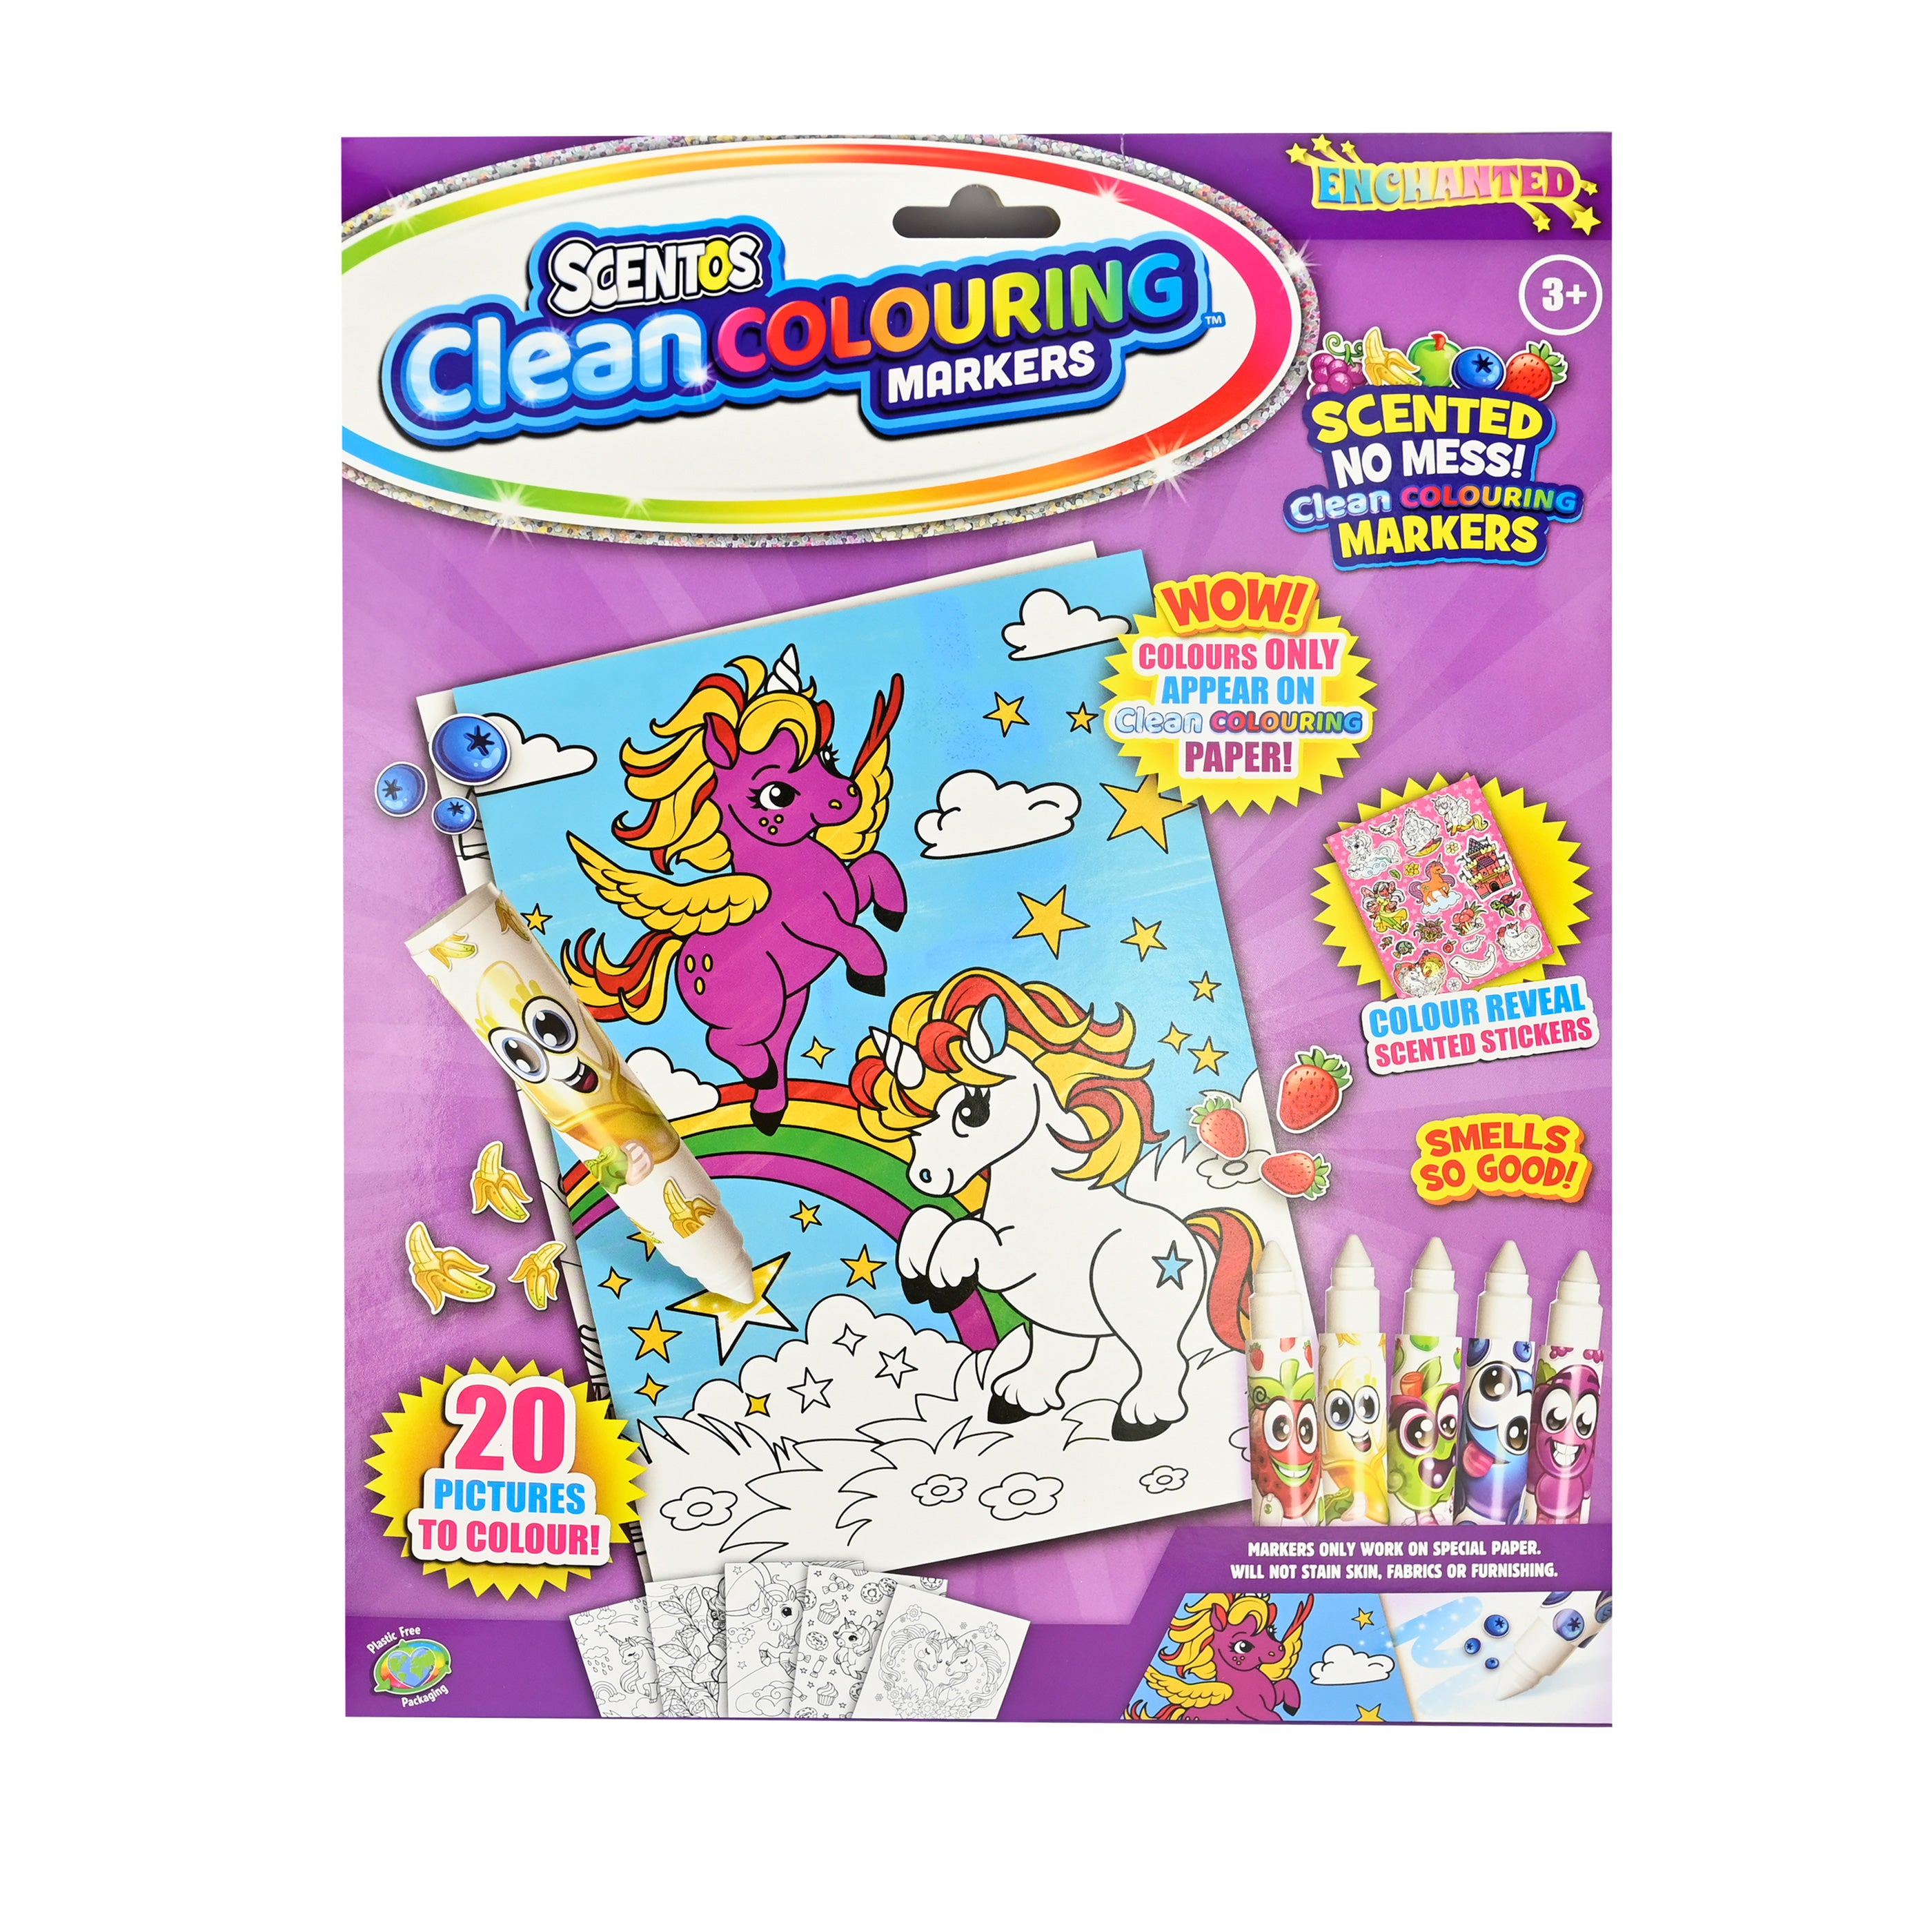 Scentos Clean Colouring Markers - Enchanted